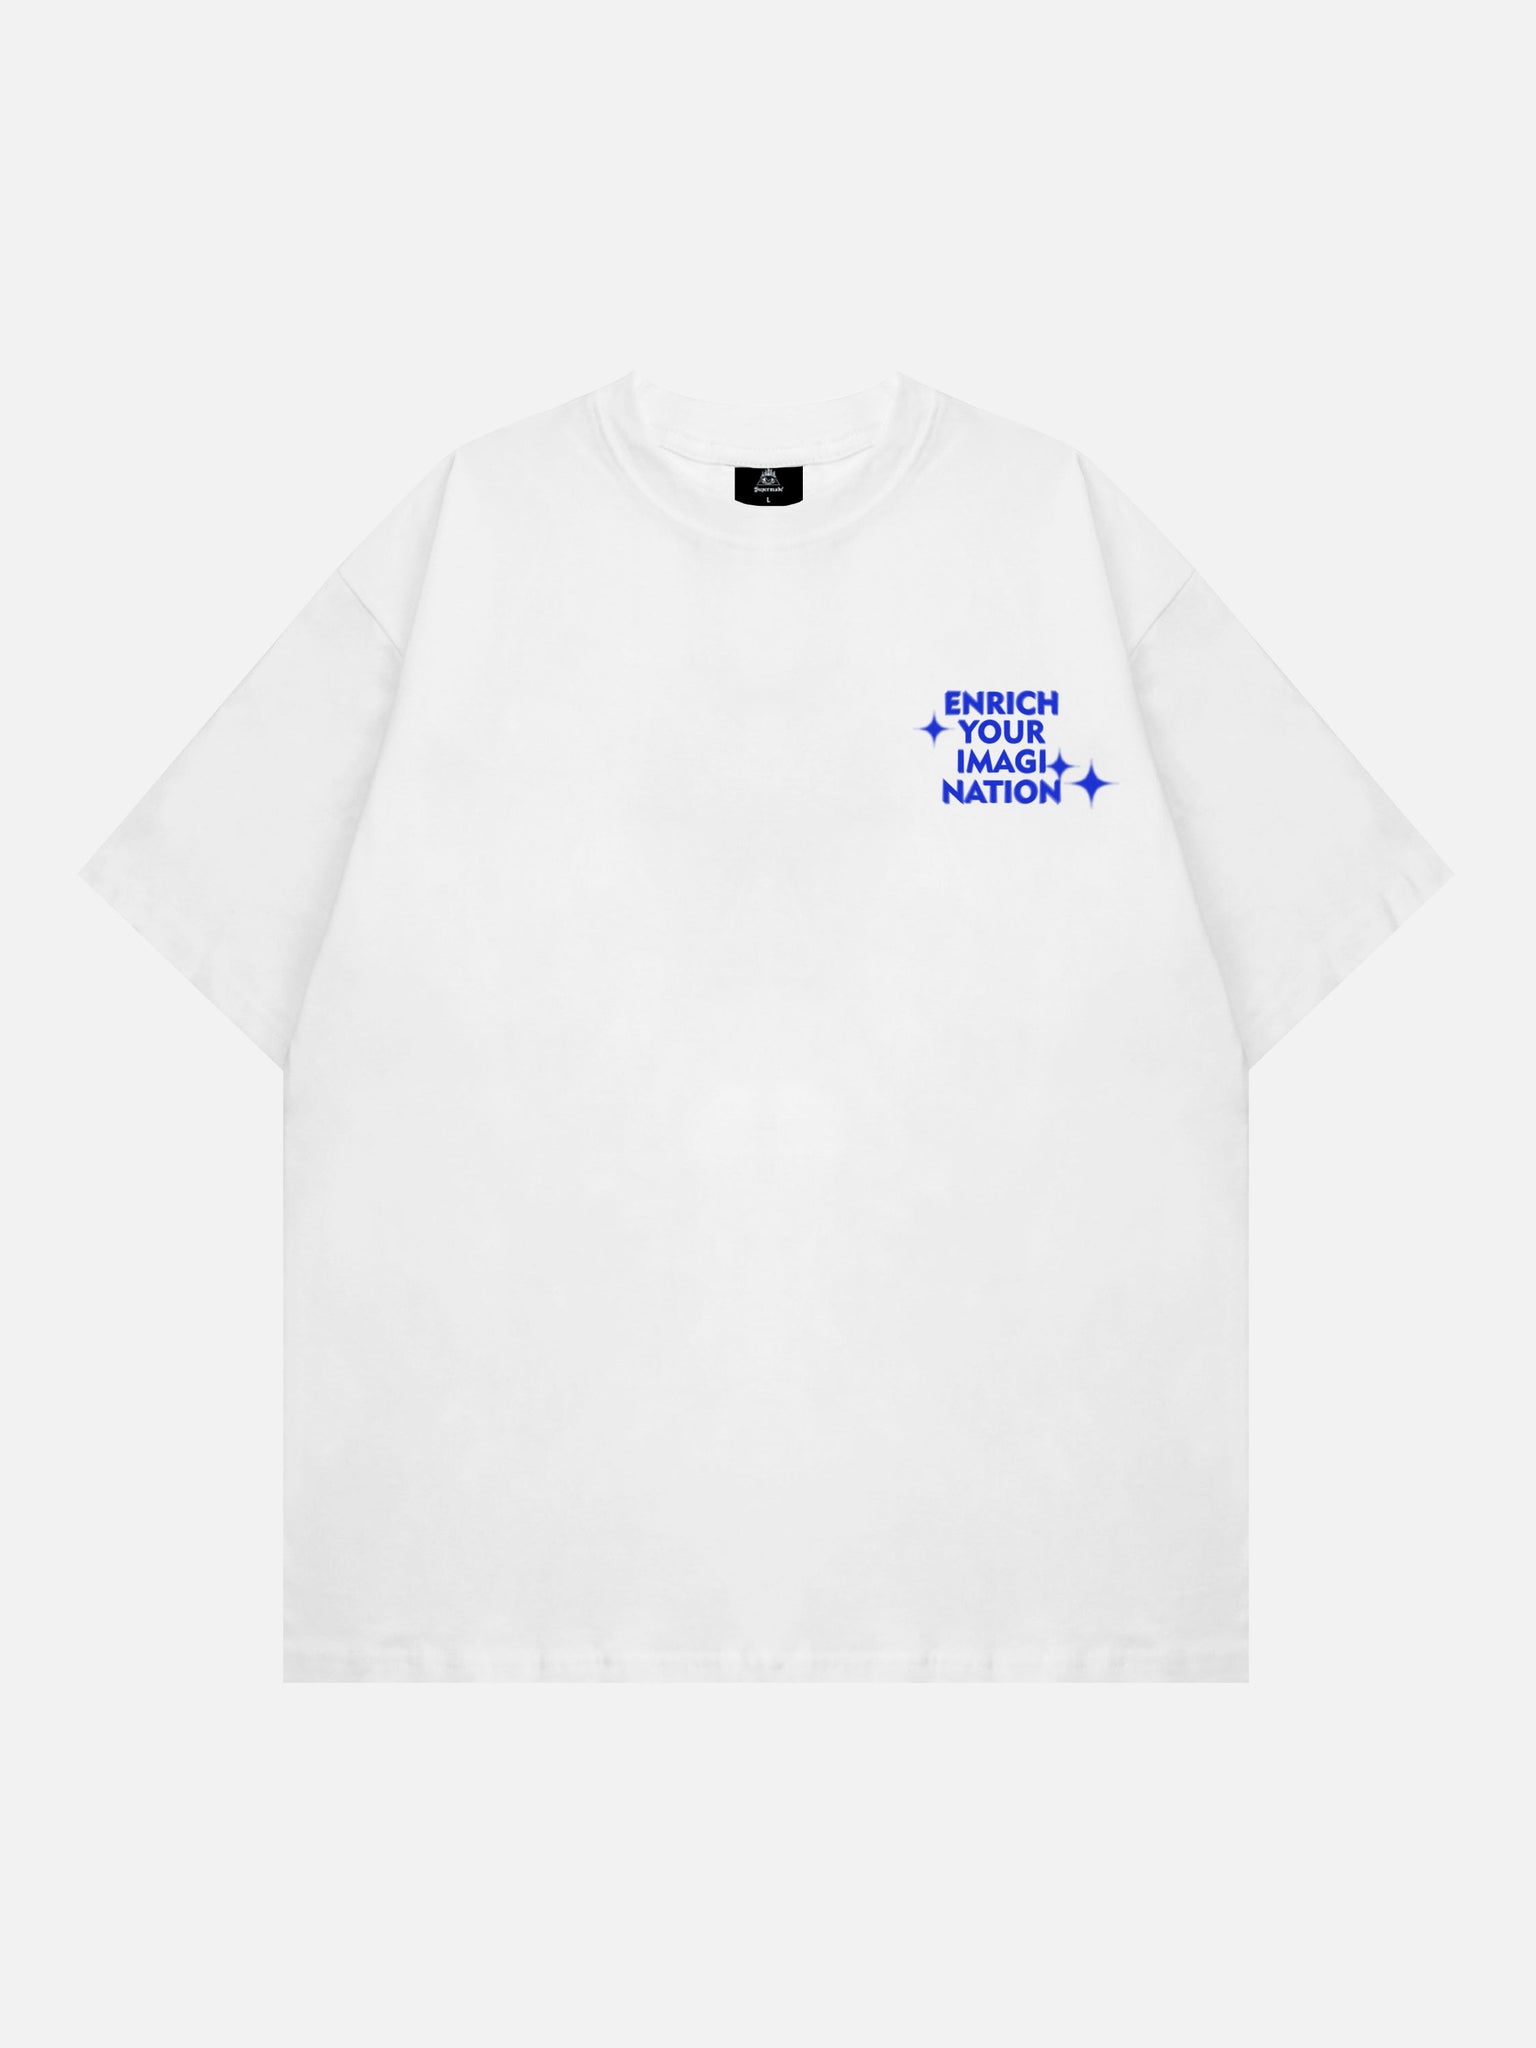 Thesupermade Letter Print Virtual T-Shirt